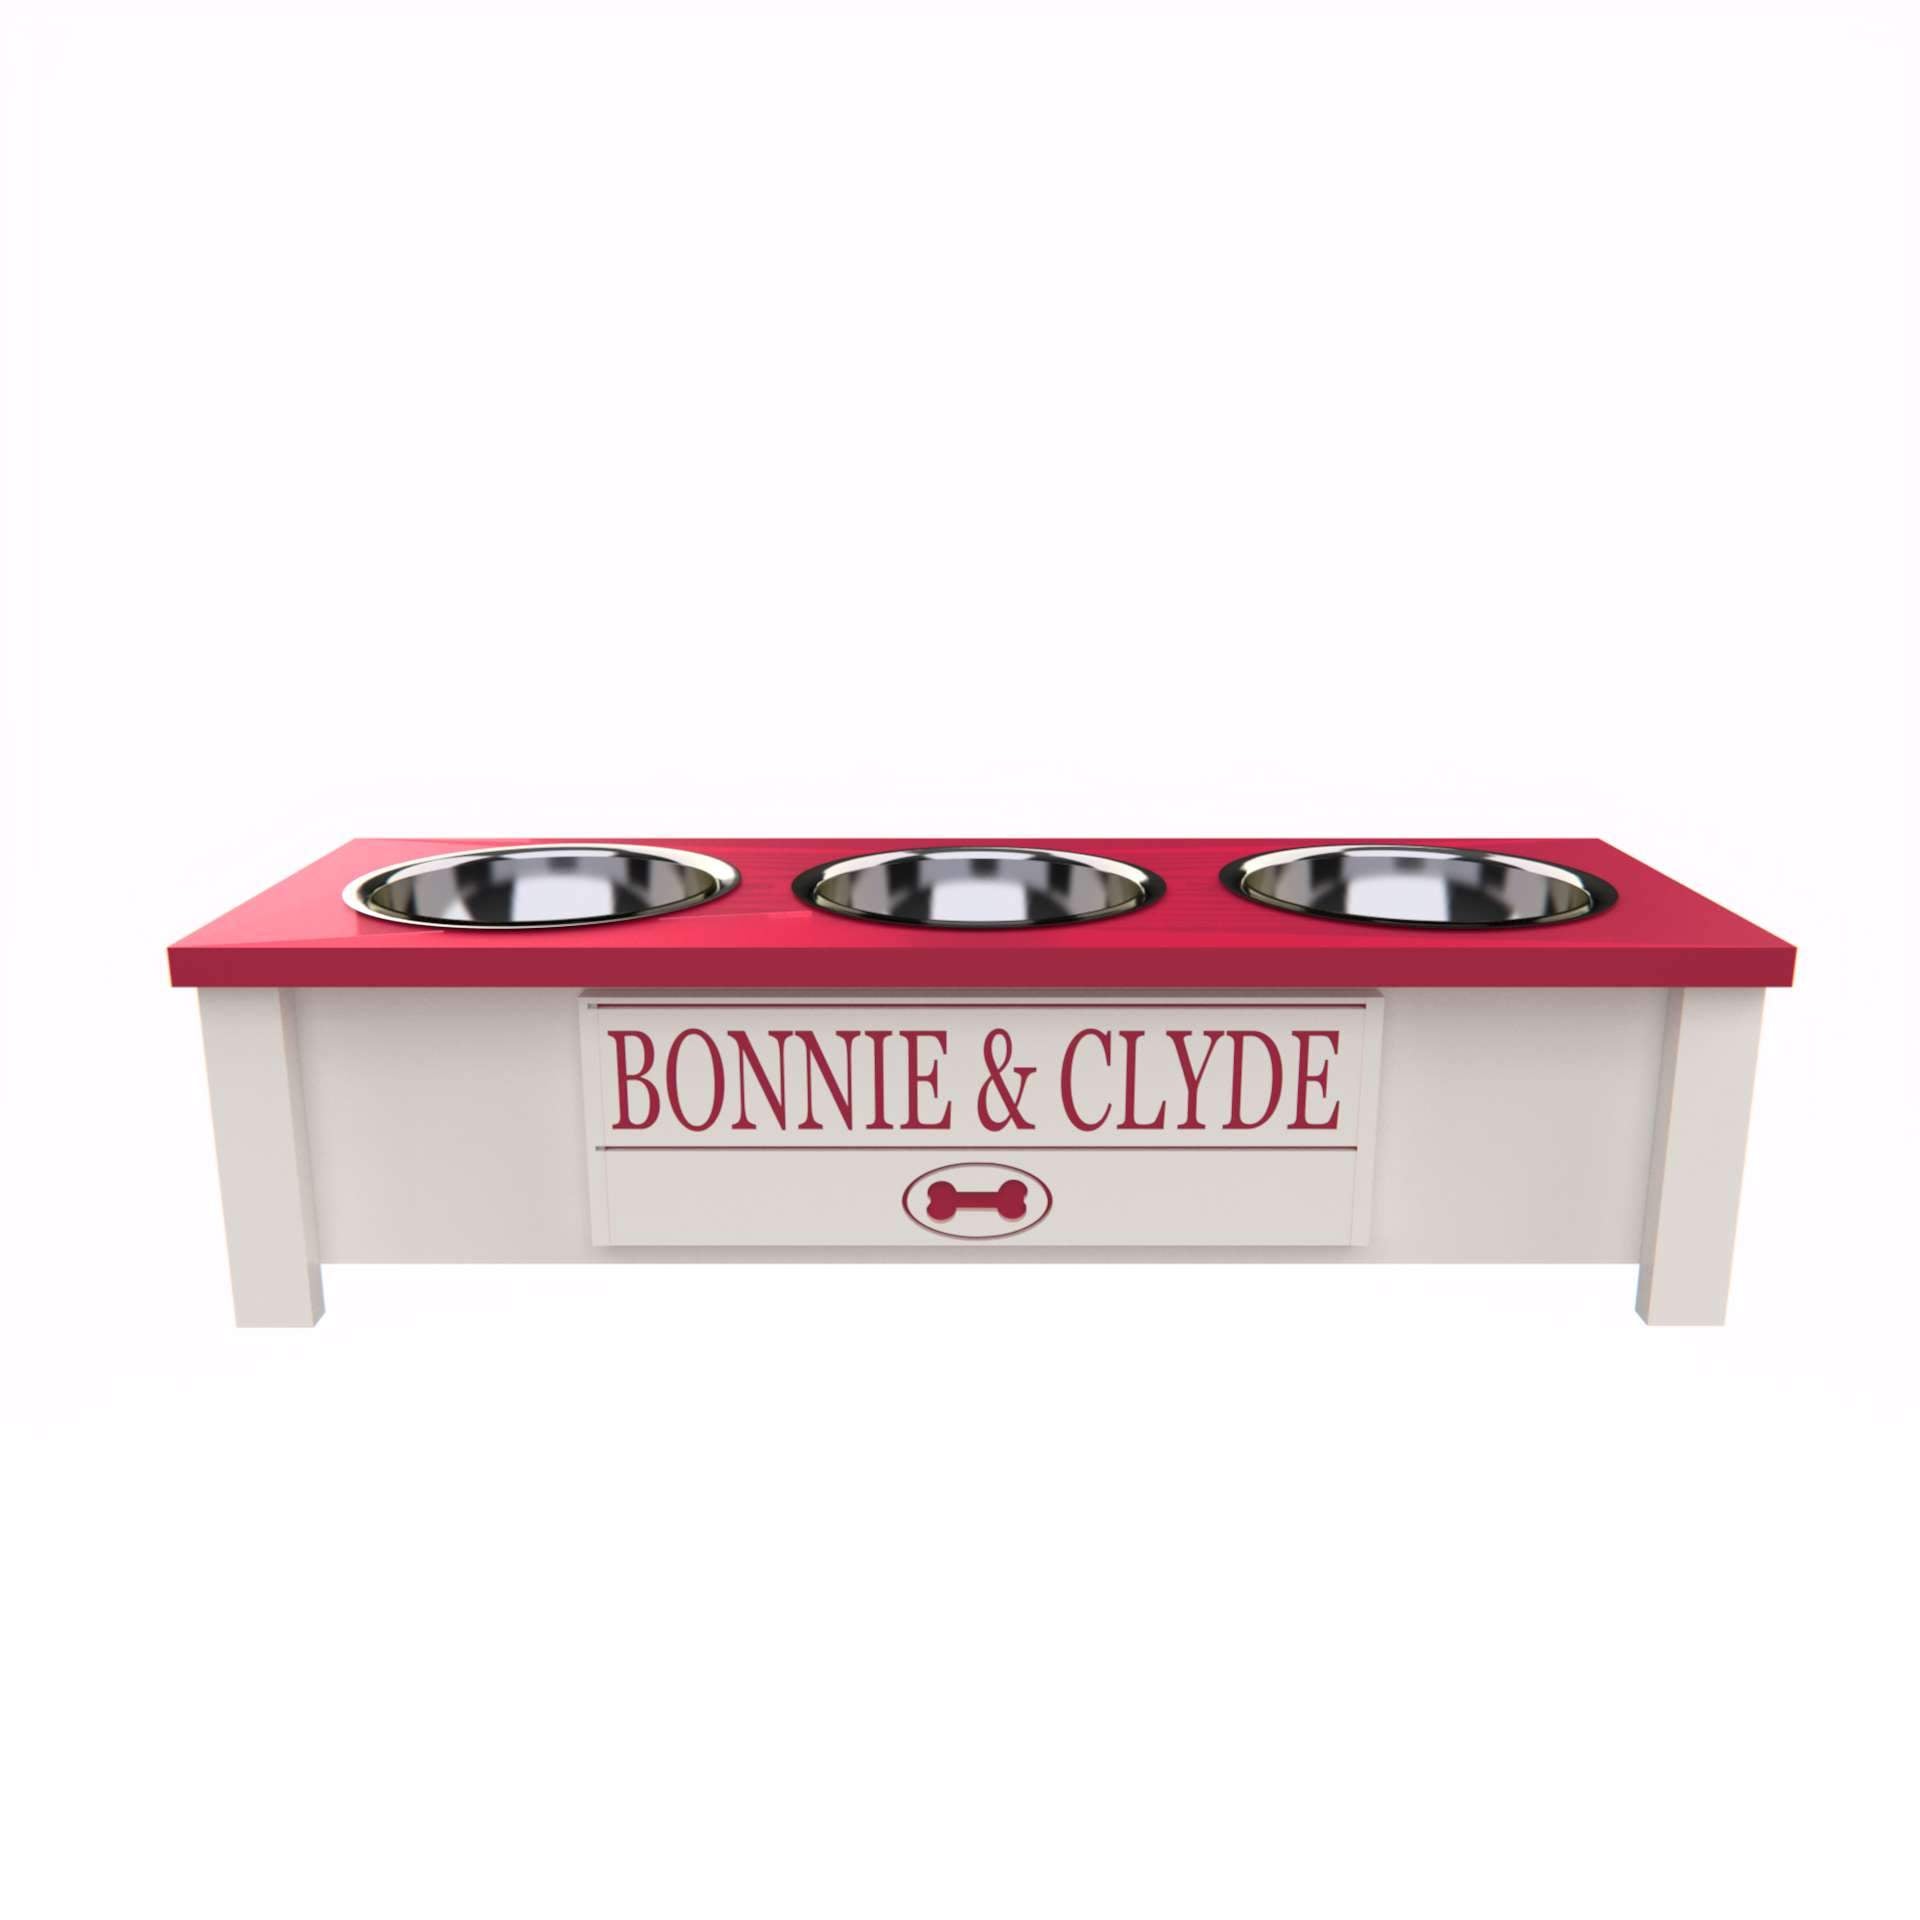 Personalized 3 Bowl Elevated Dog Feeder in Magenta - GrooveThis Woodshop - GT006MAG-S